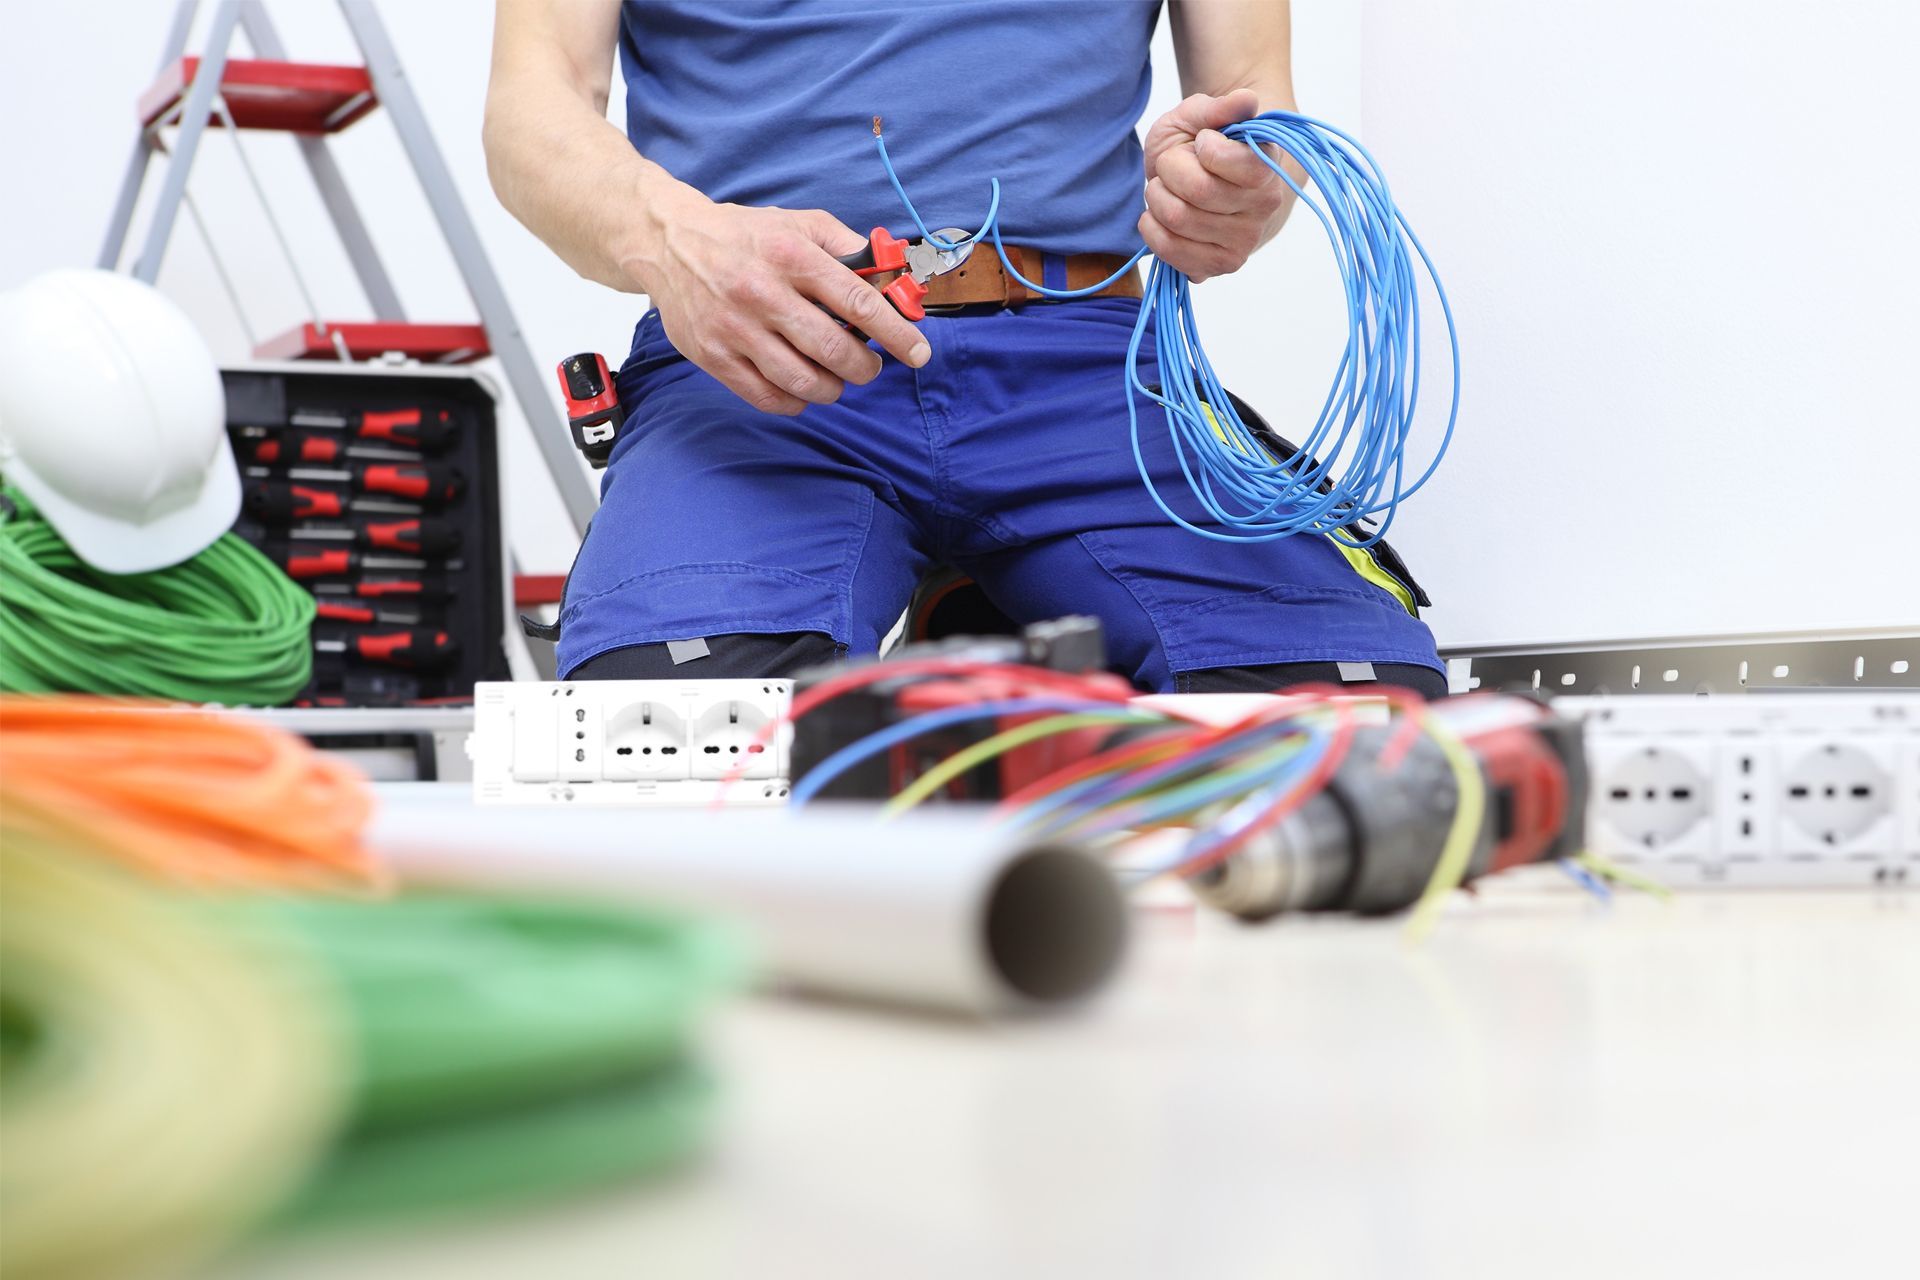 Electrician Cutting an Electrical Wire